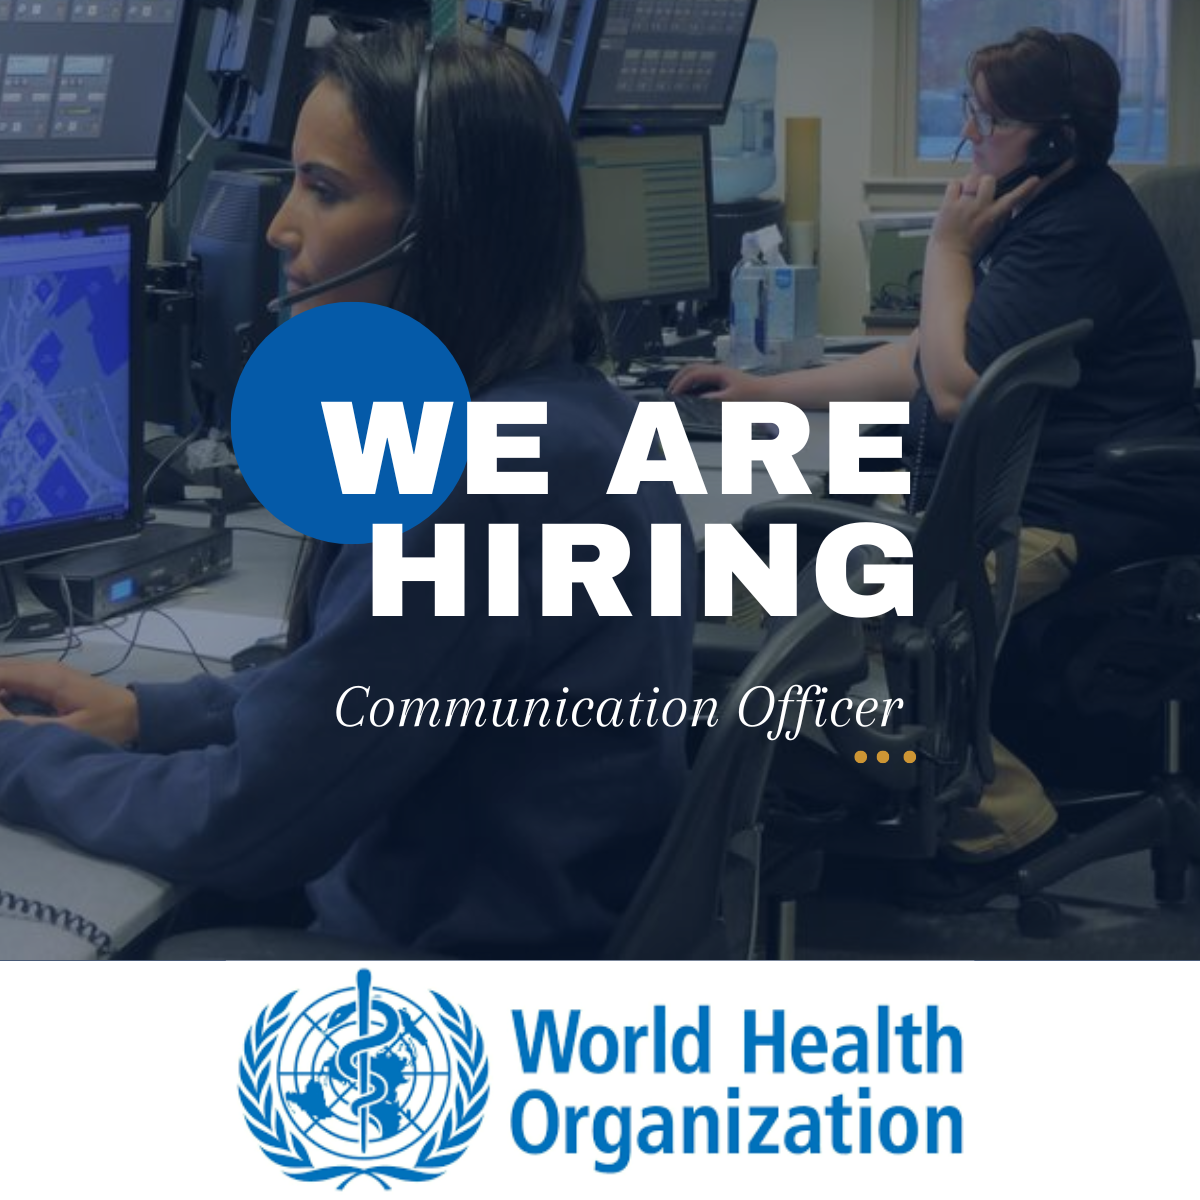 Join the World Health Organization (WHO) as a Communication Officer and make a difference in the field of global health. Apply now to be considered for this exciting position and help shape the future of healthcare worldwide.